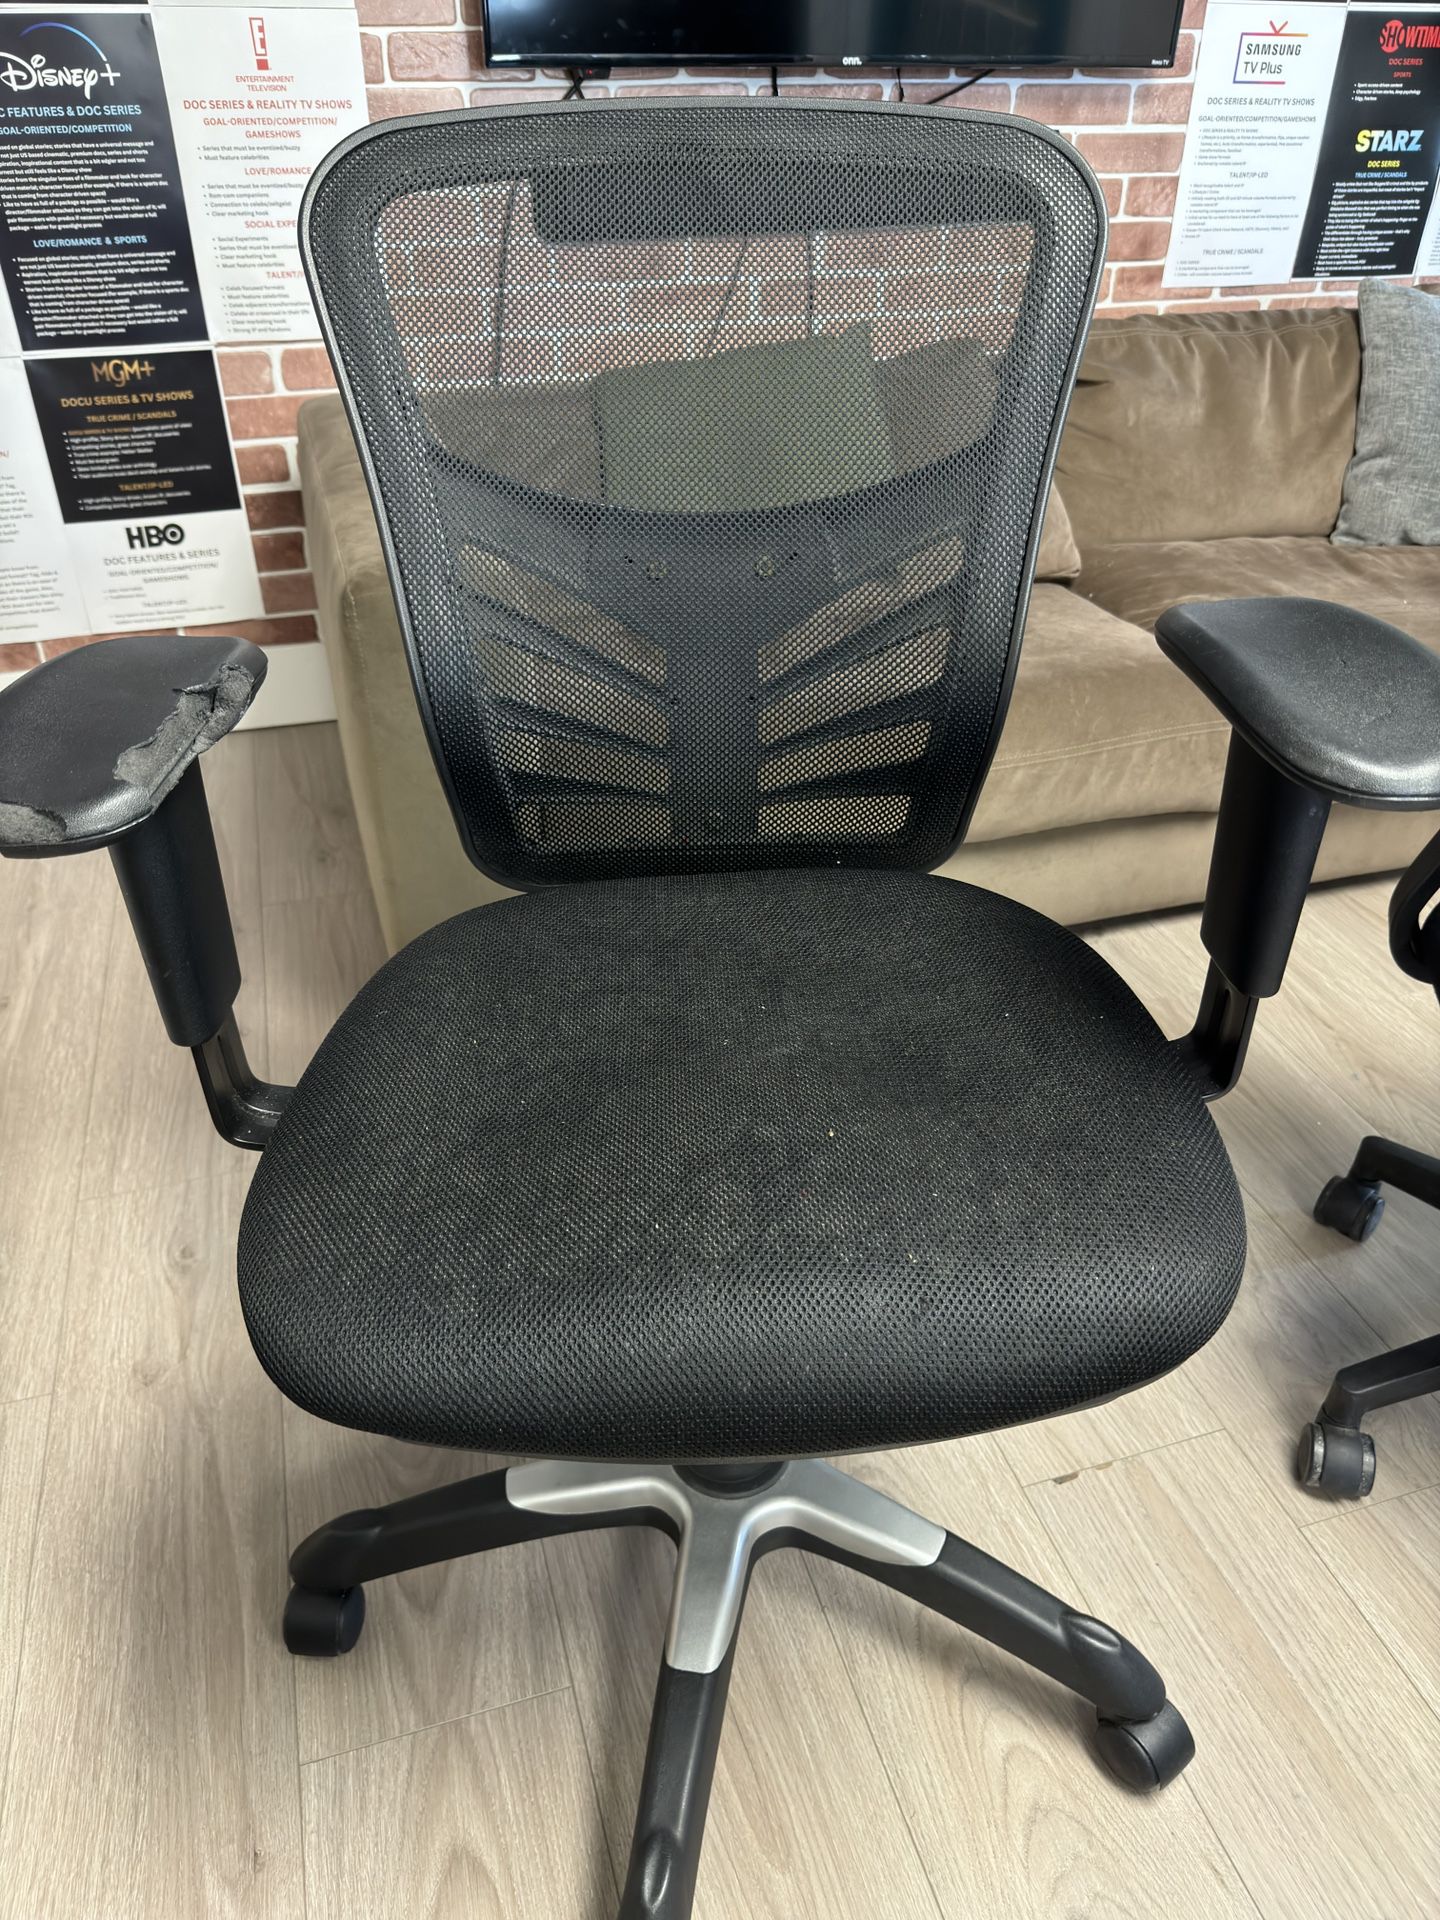 FREE Office Chair!